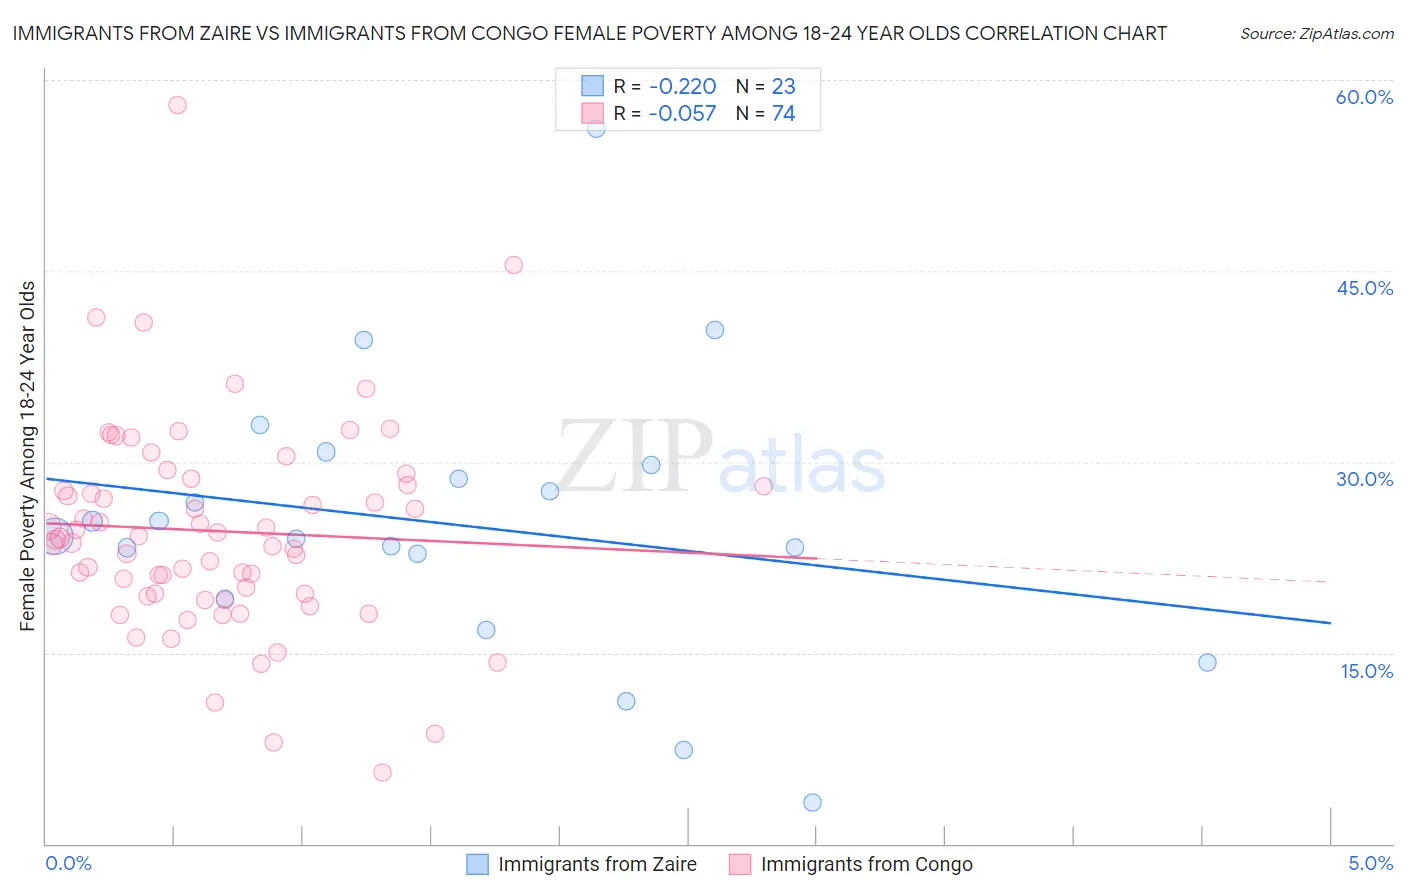 Immigrants from Zaire vs Immigrants from Congo Female Poverty Among 18-24 Year Olds